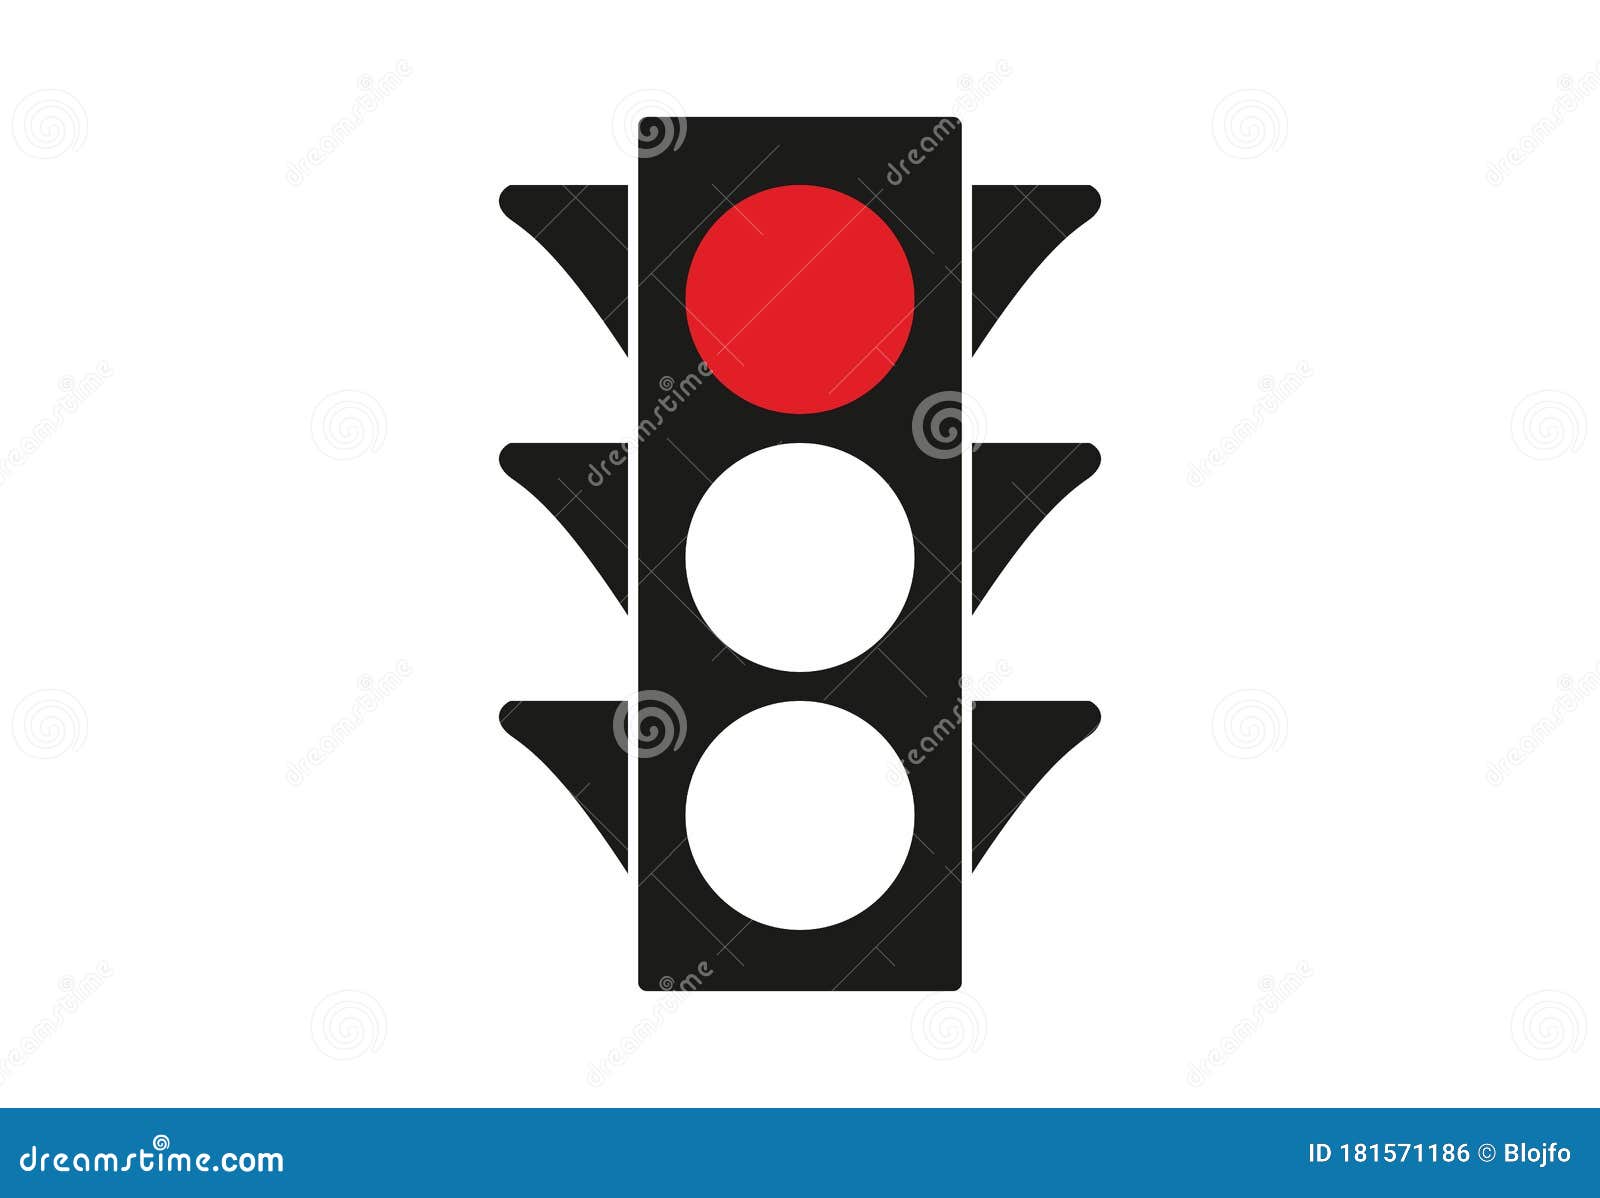 Traffic light logo Images - Search Images on Everypixel